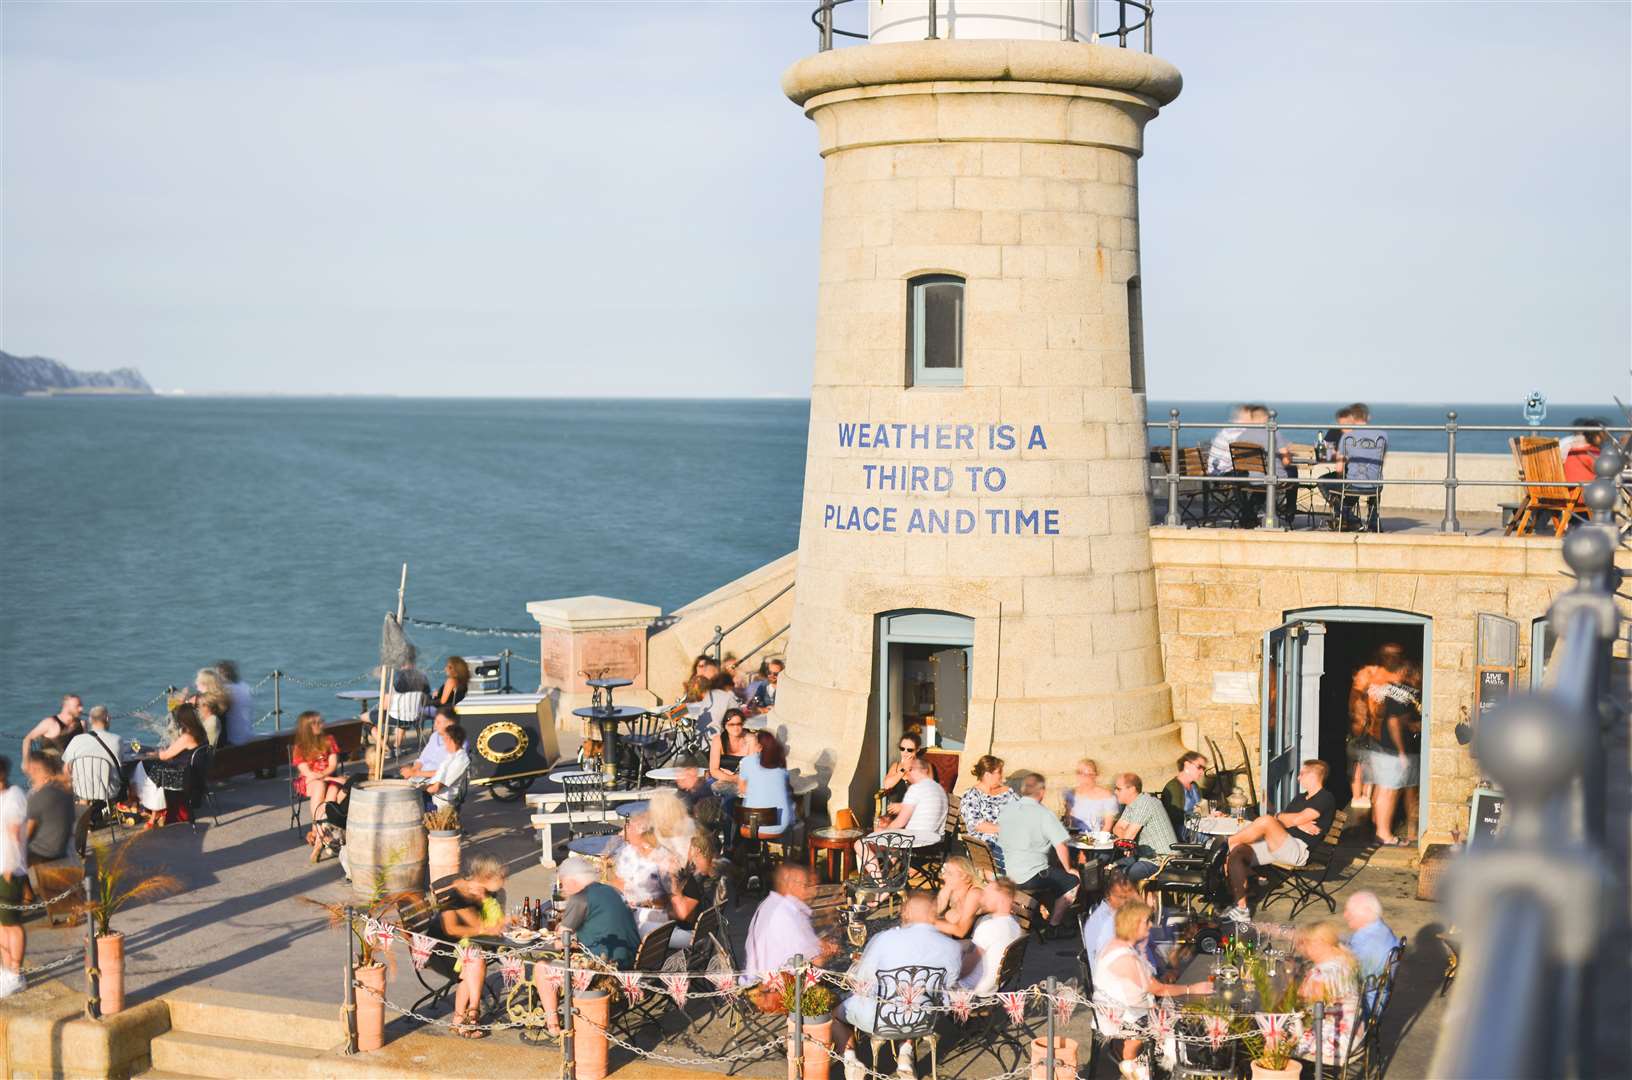 The Lighthouse Champagne Bar has been a hit with locals and visitors alike. Picture: Folkestone Harbour Arm